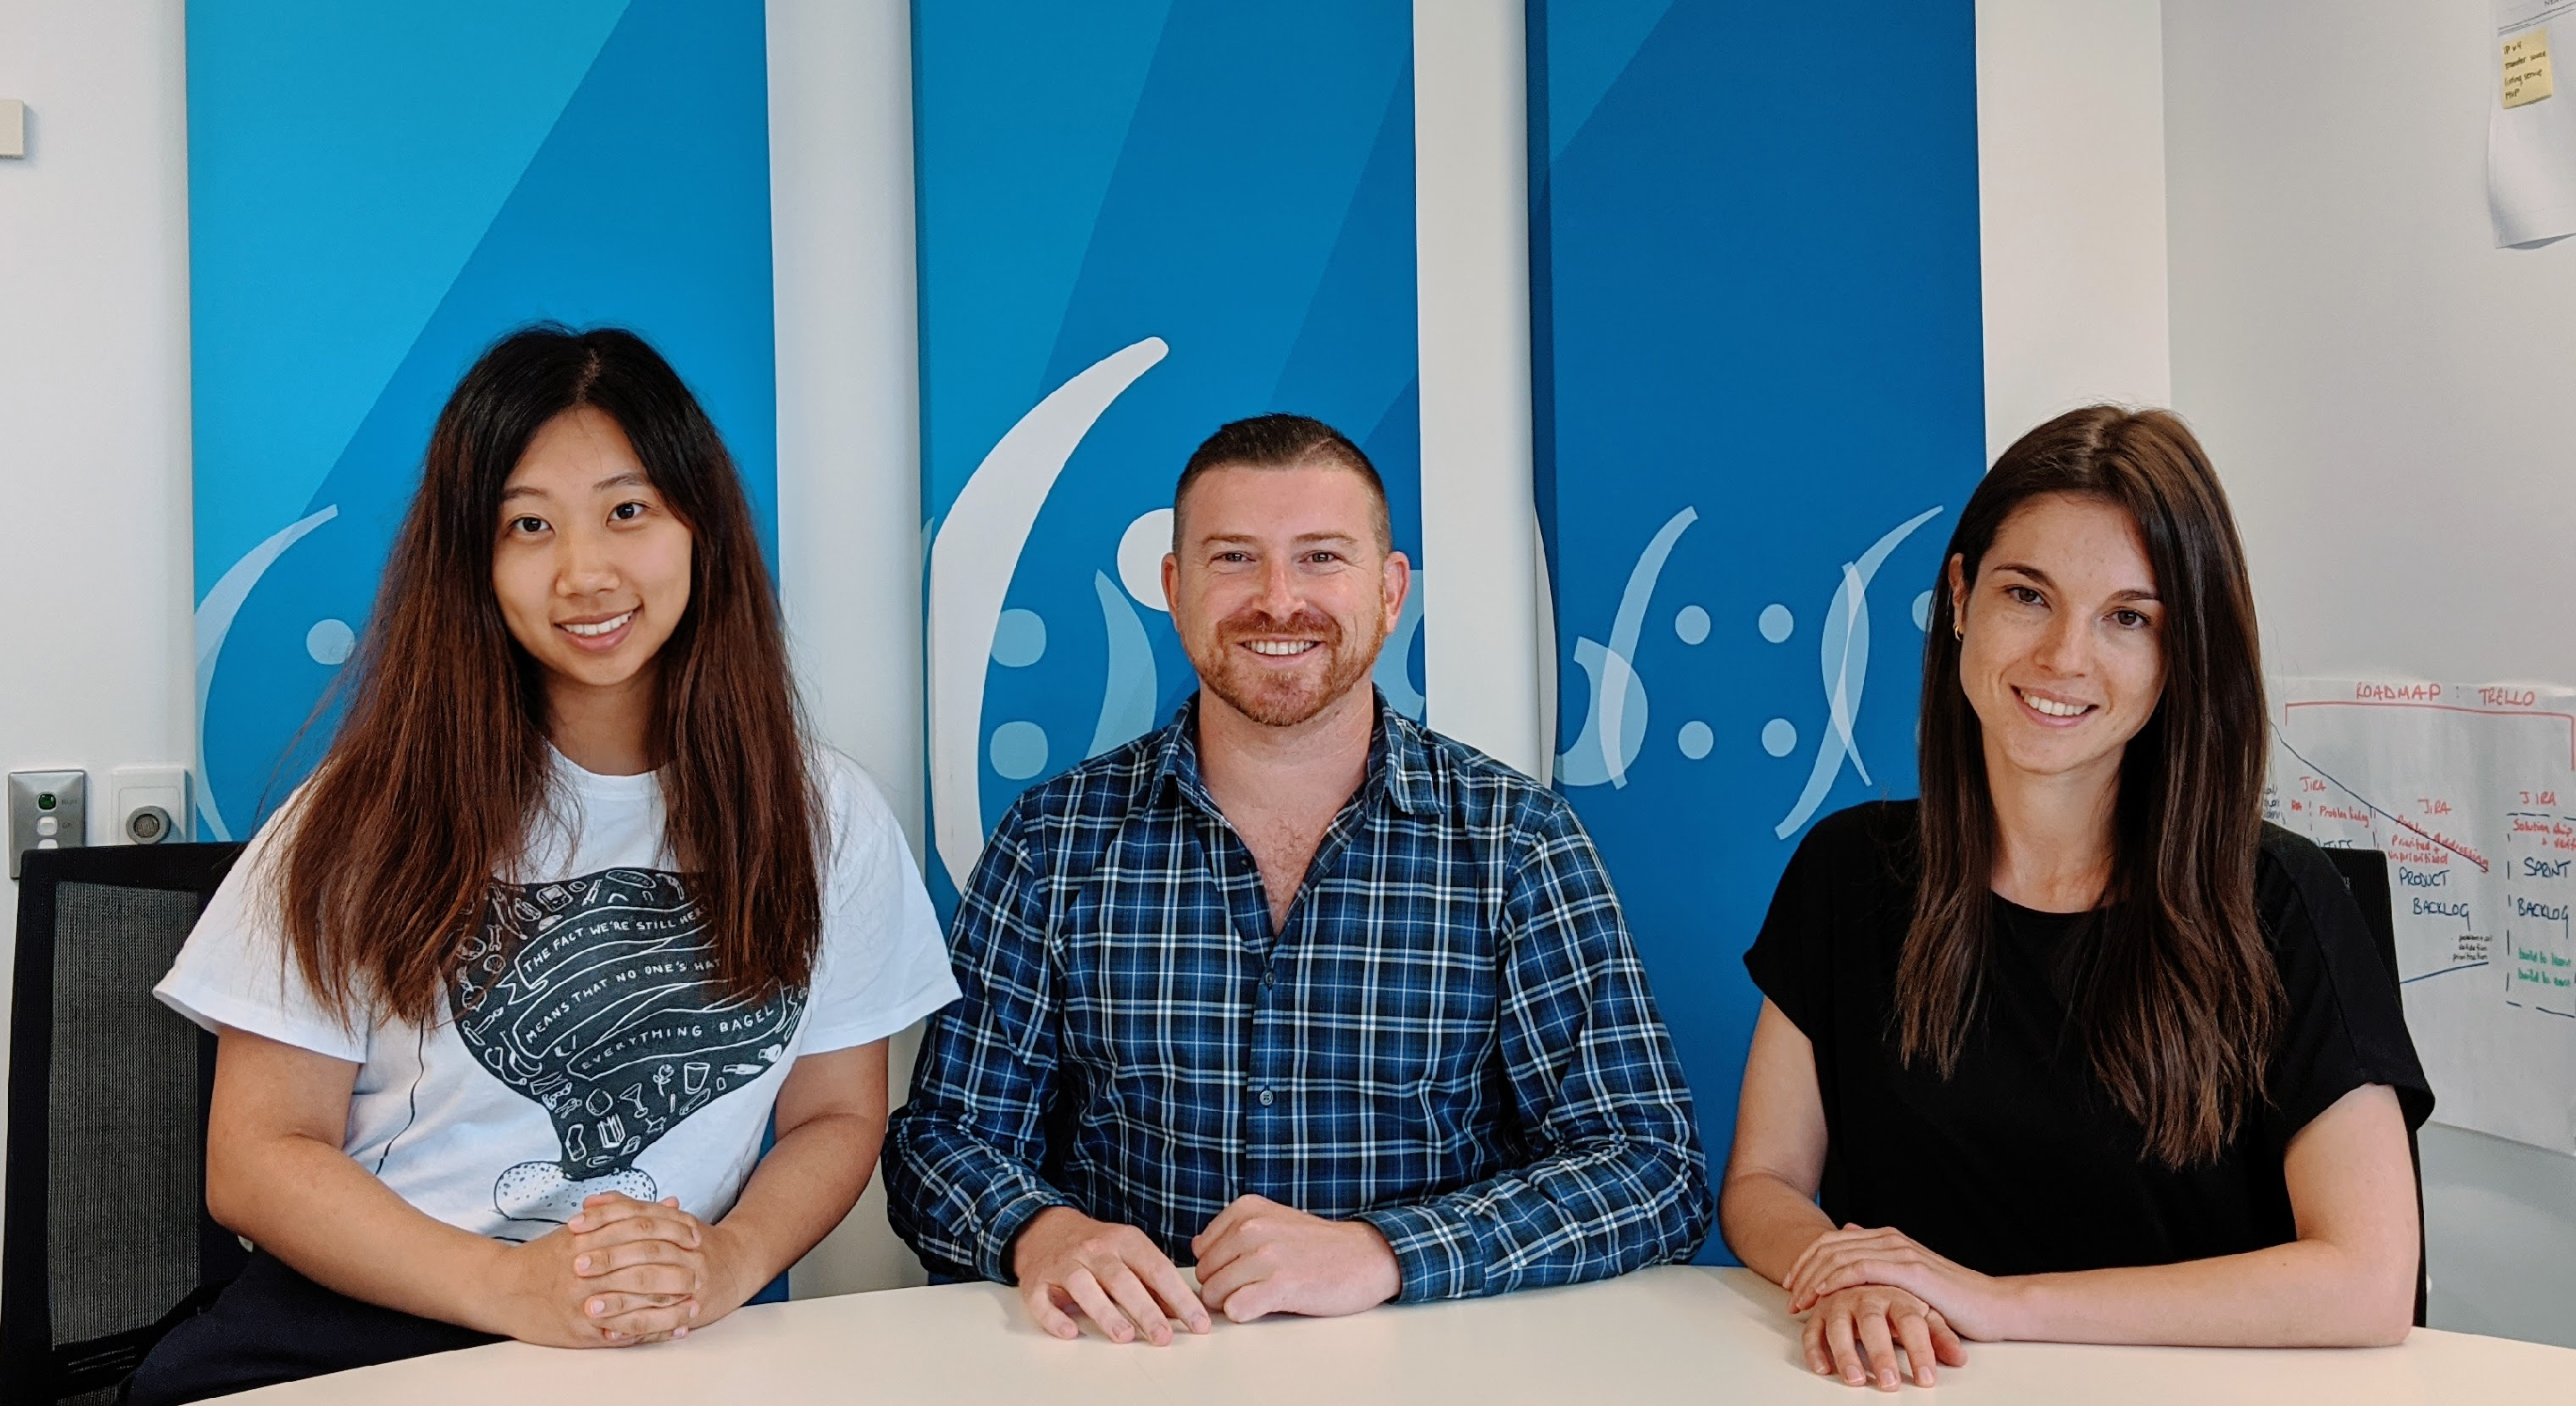 ux team - Lily, Dale and Raquel